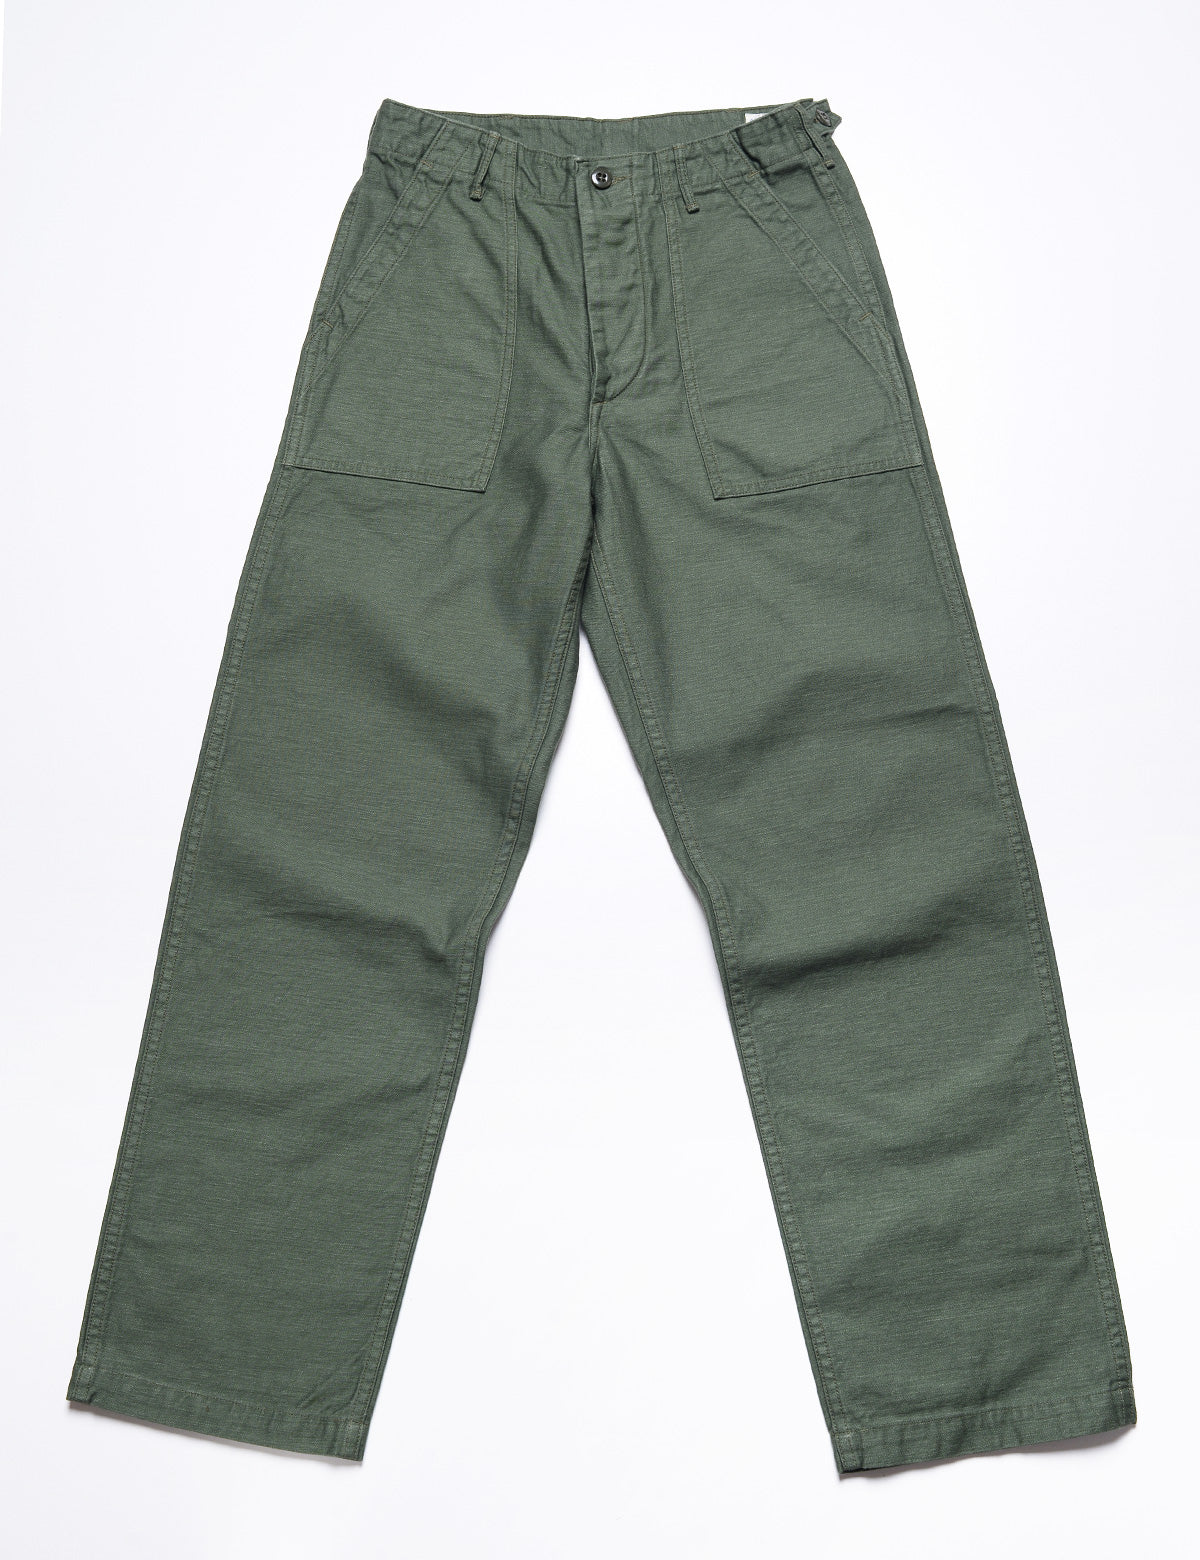 Full length flat shot of Orslow US Army Fatigue Trousers - Army Green